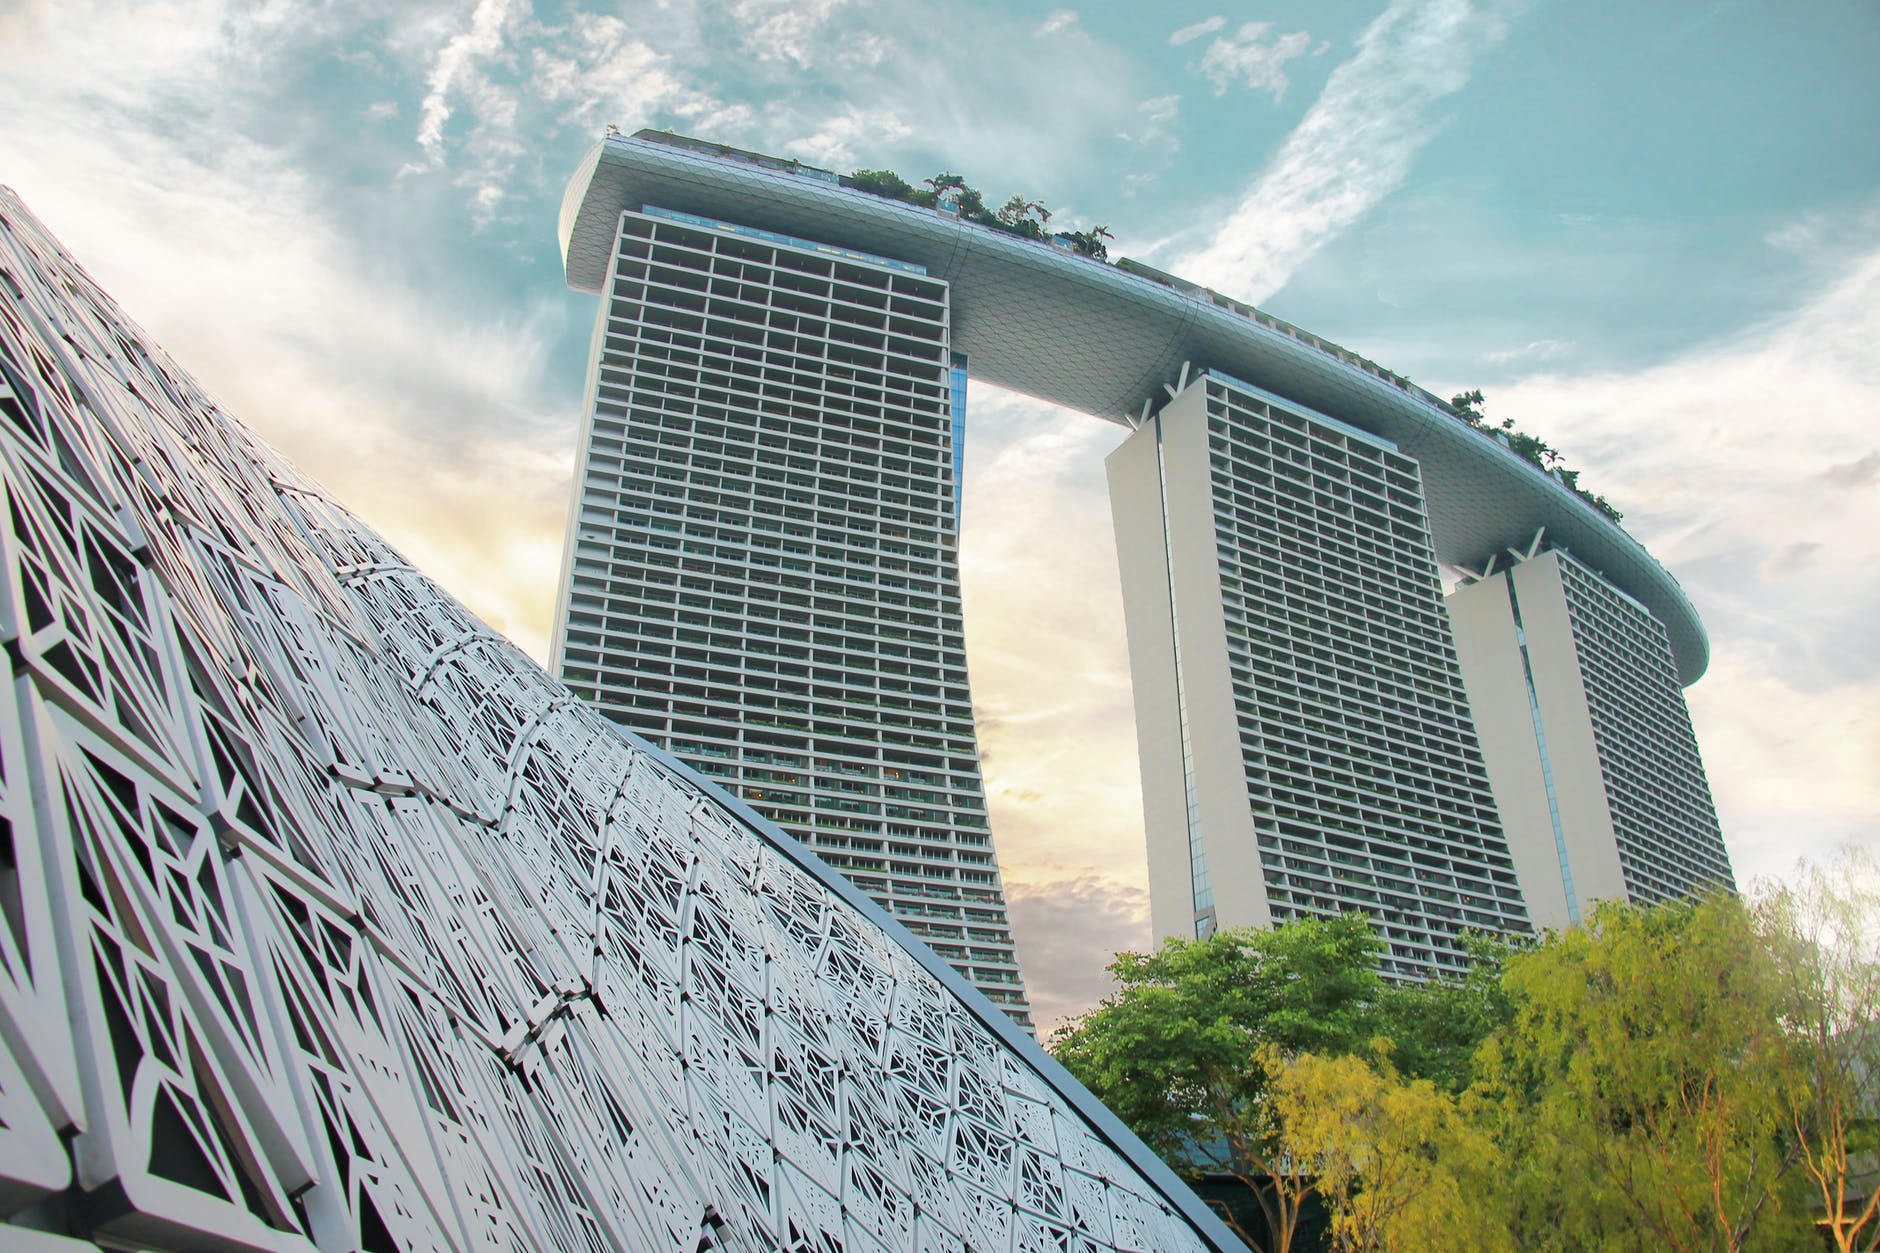 DBS: Singapore Market Focus – Focus on FY22 earnings recovery